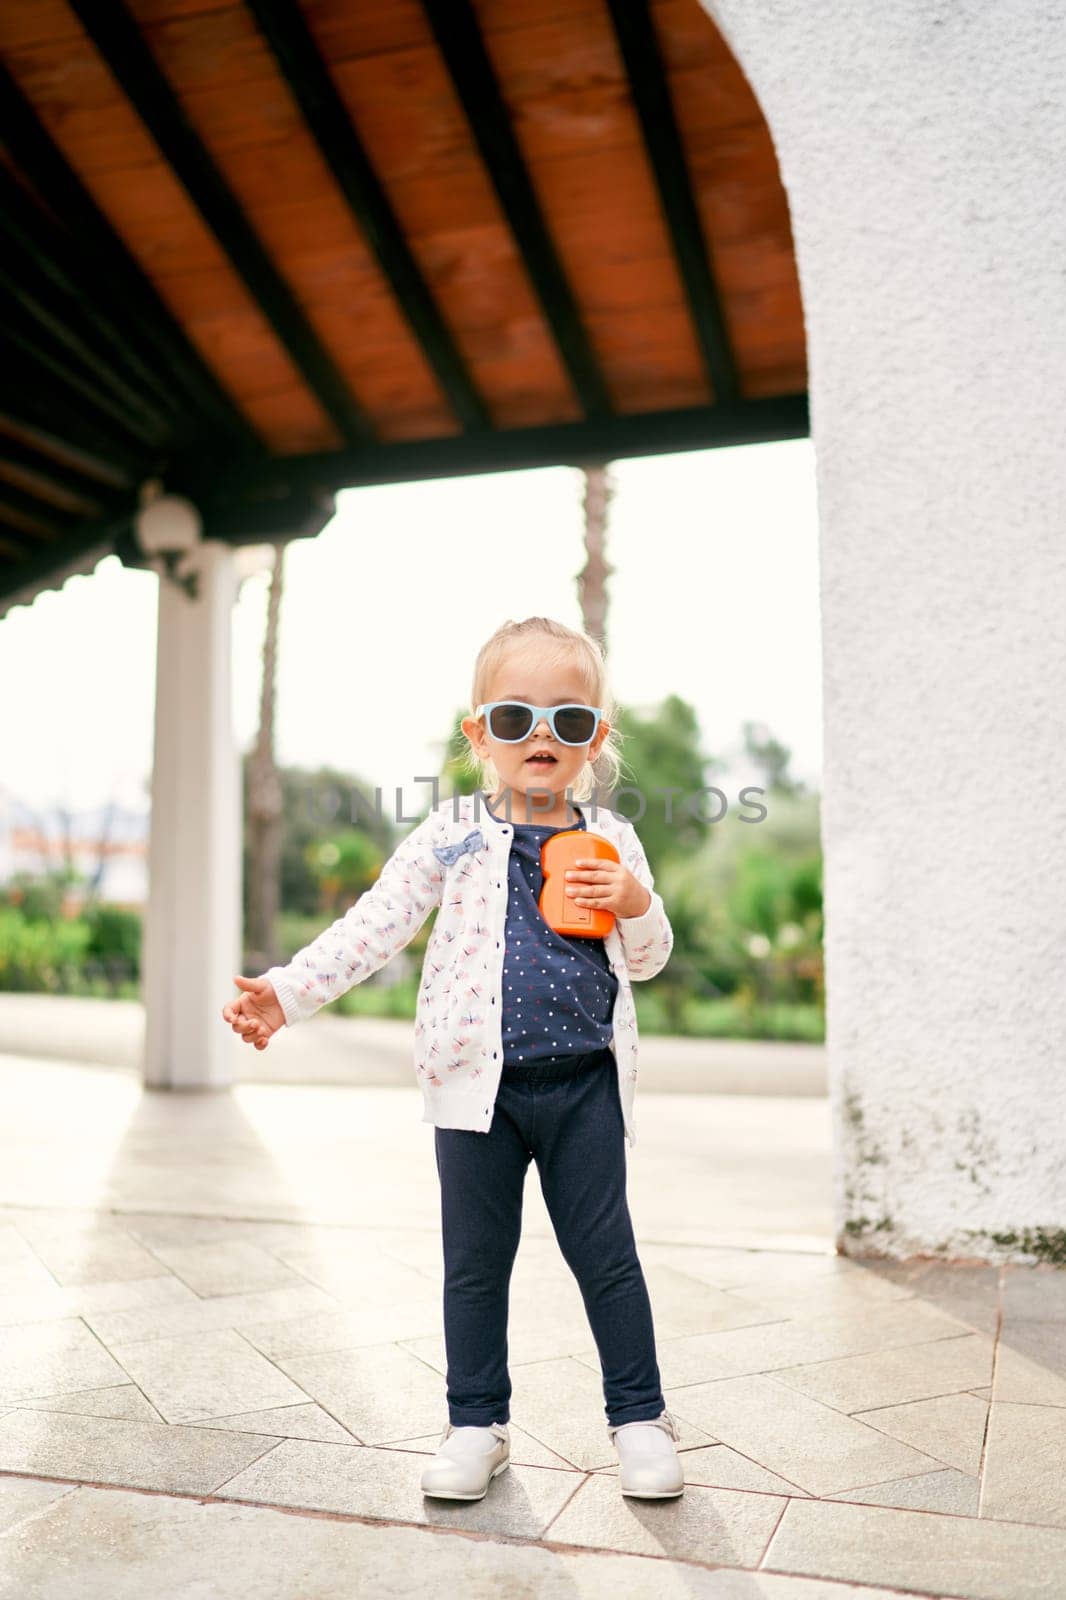 Little girl in sunglasses stands on a tile in a pergola in the garden by Nadtochiy